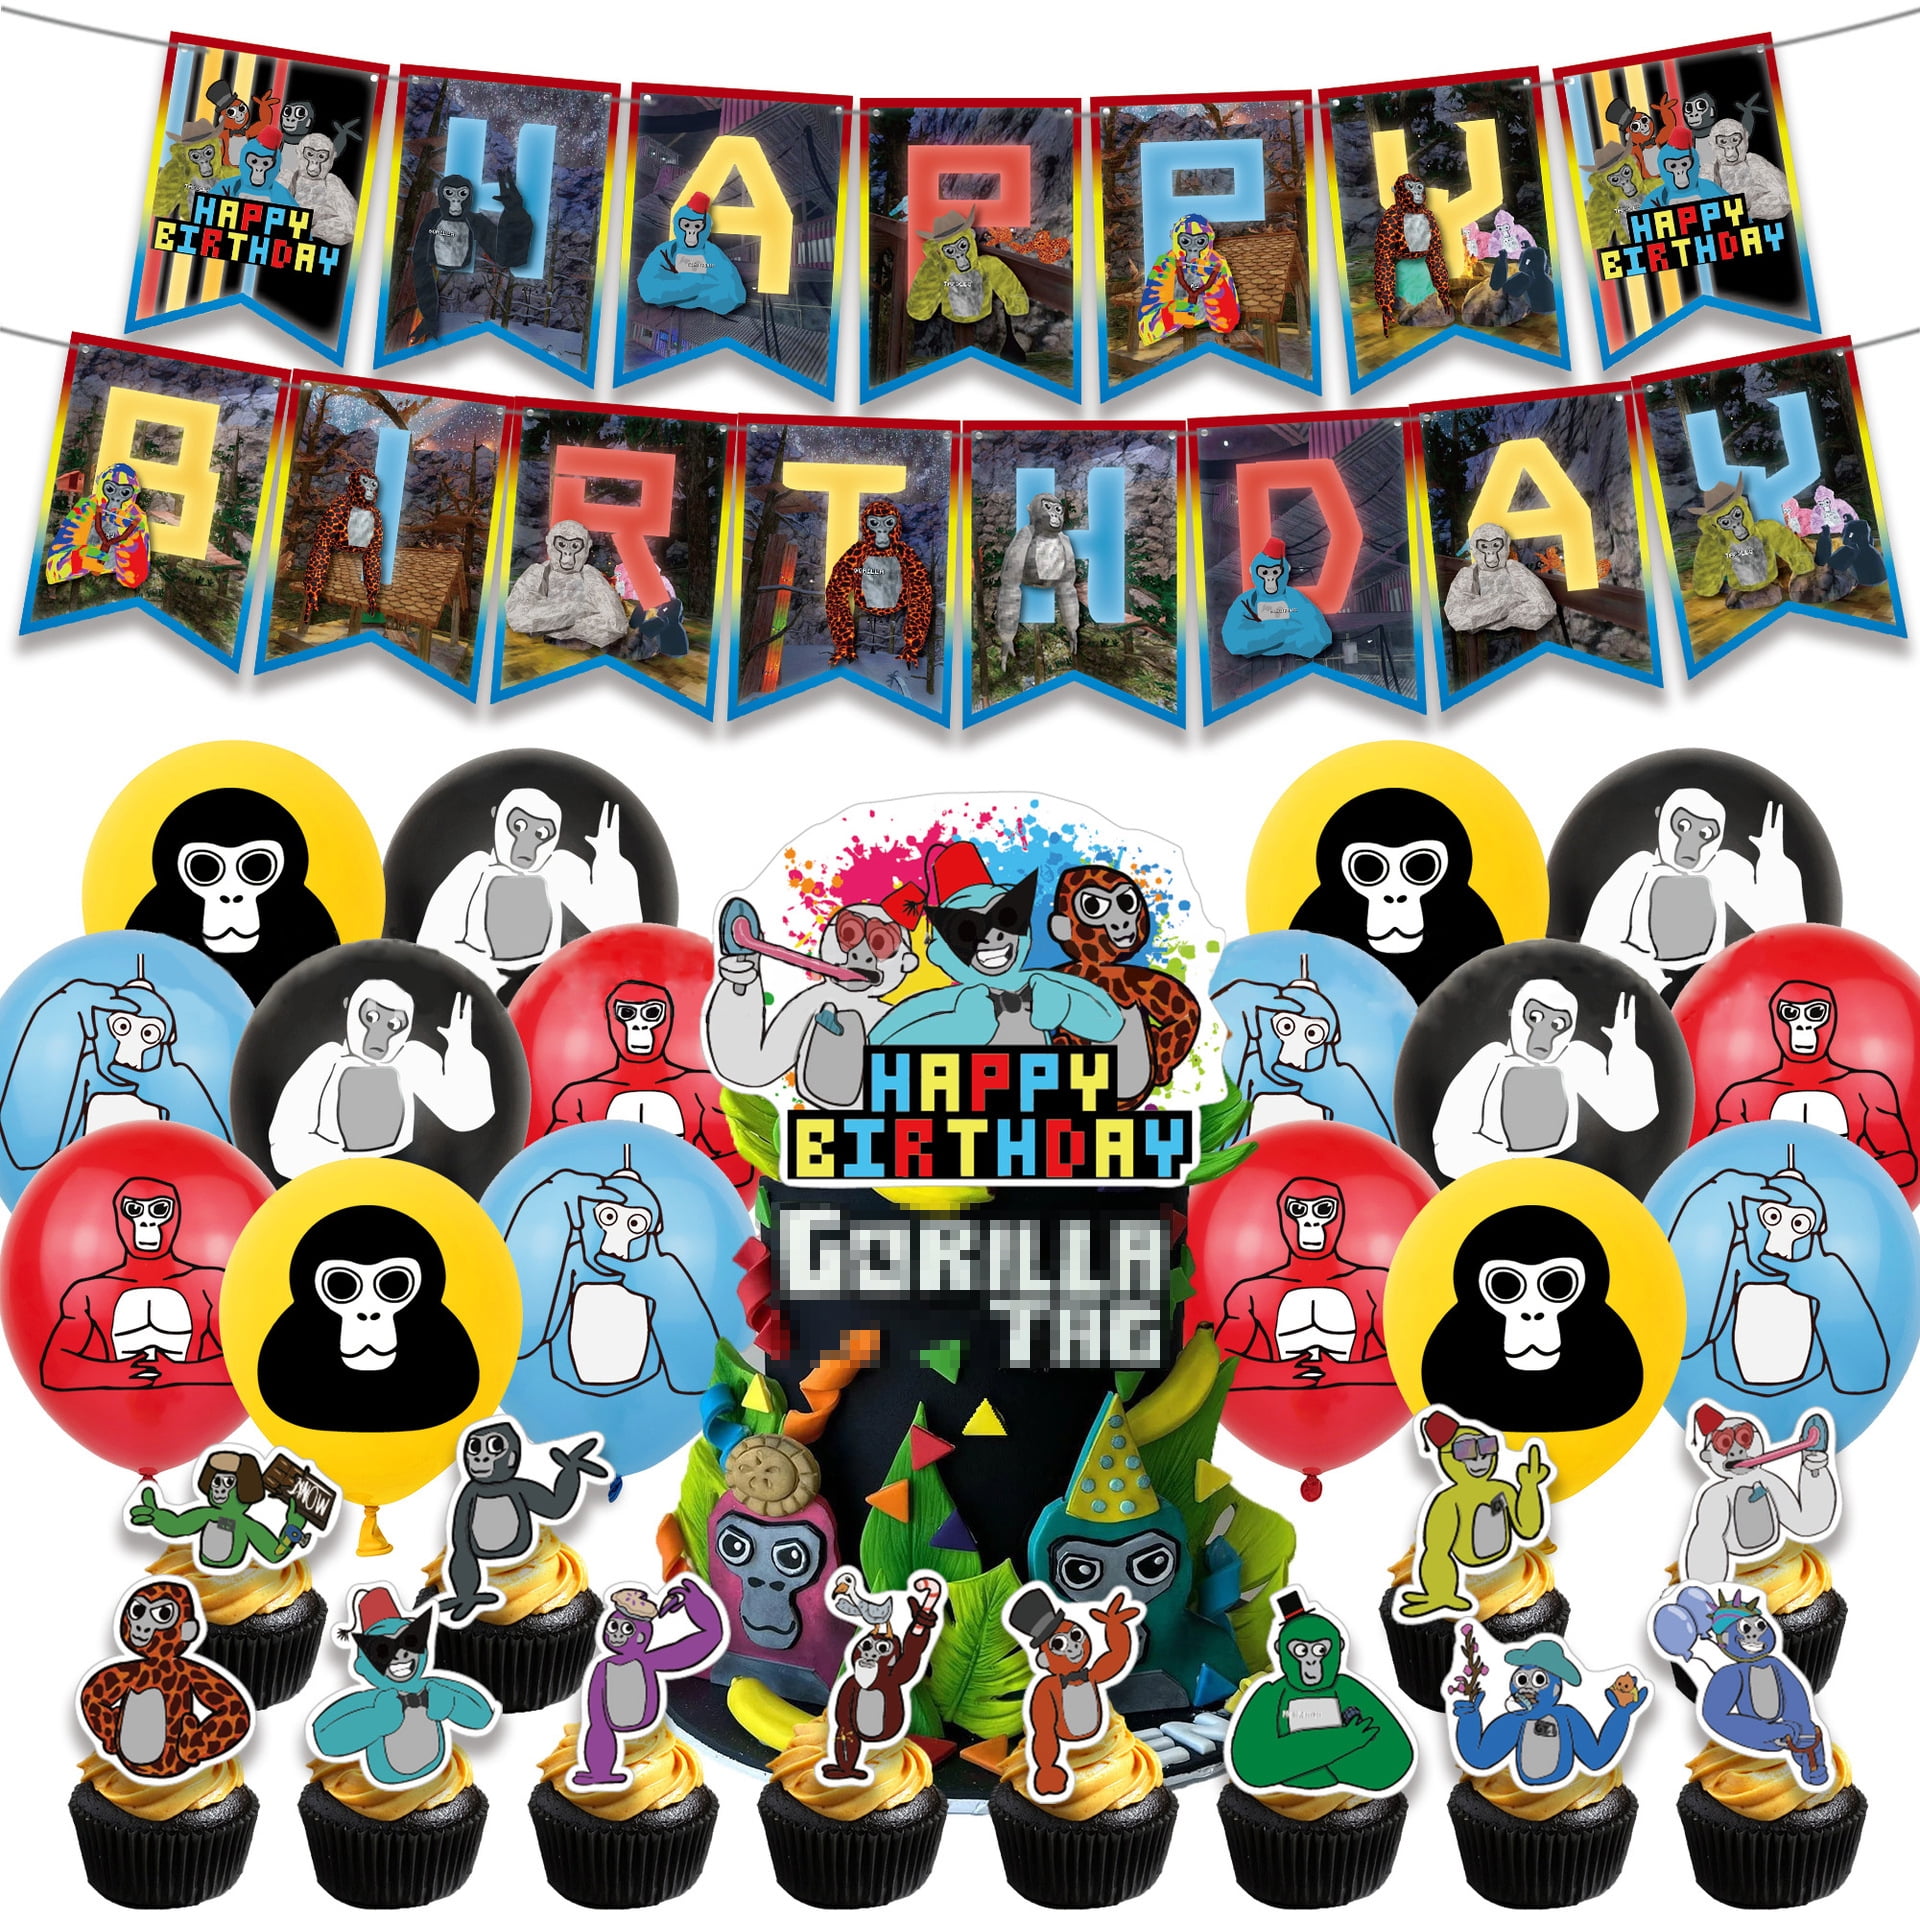 Cartoon Birthday Party Decorations Gifts Presents Sweet Cupcakes